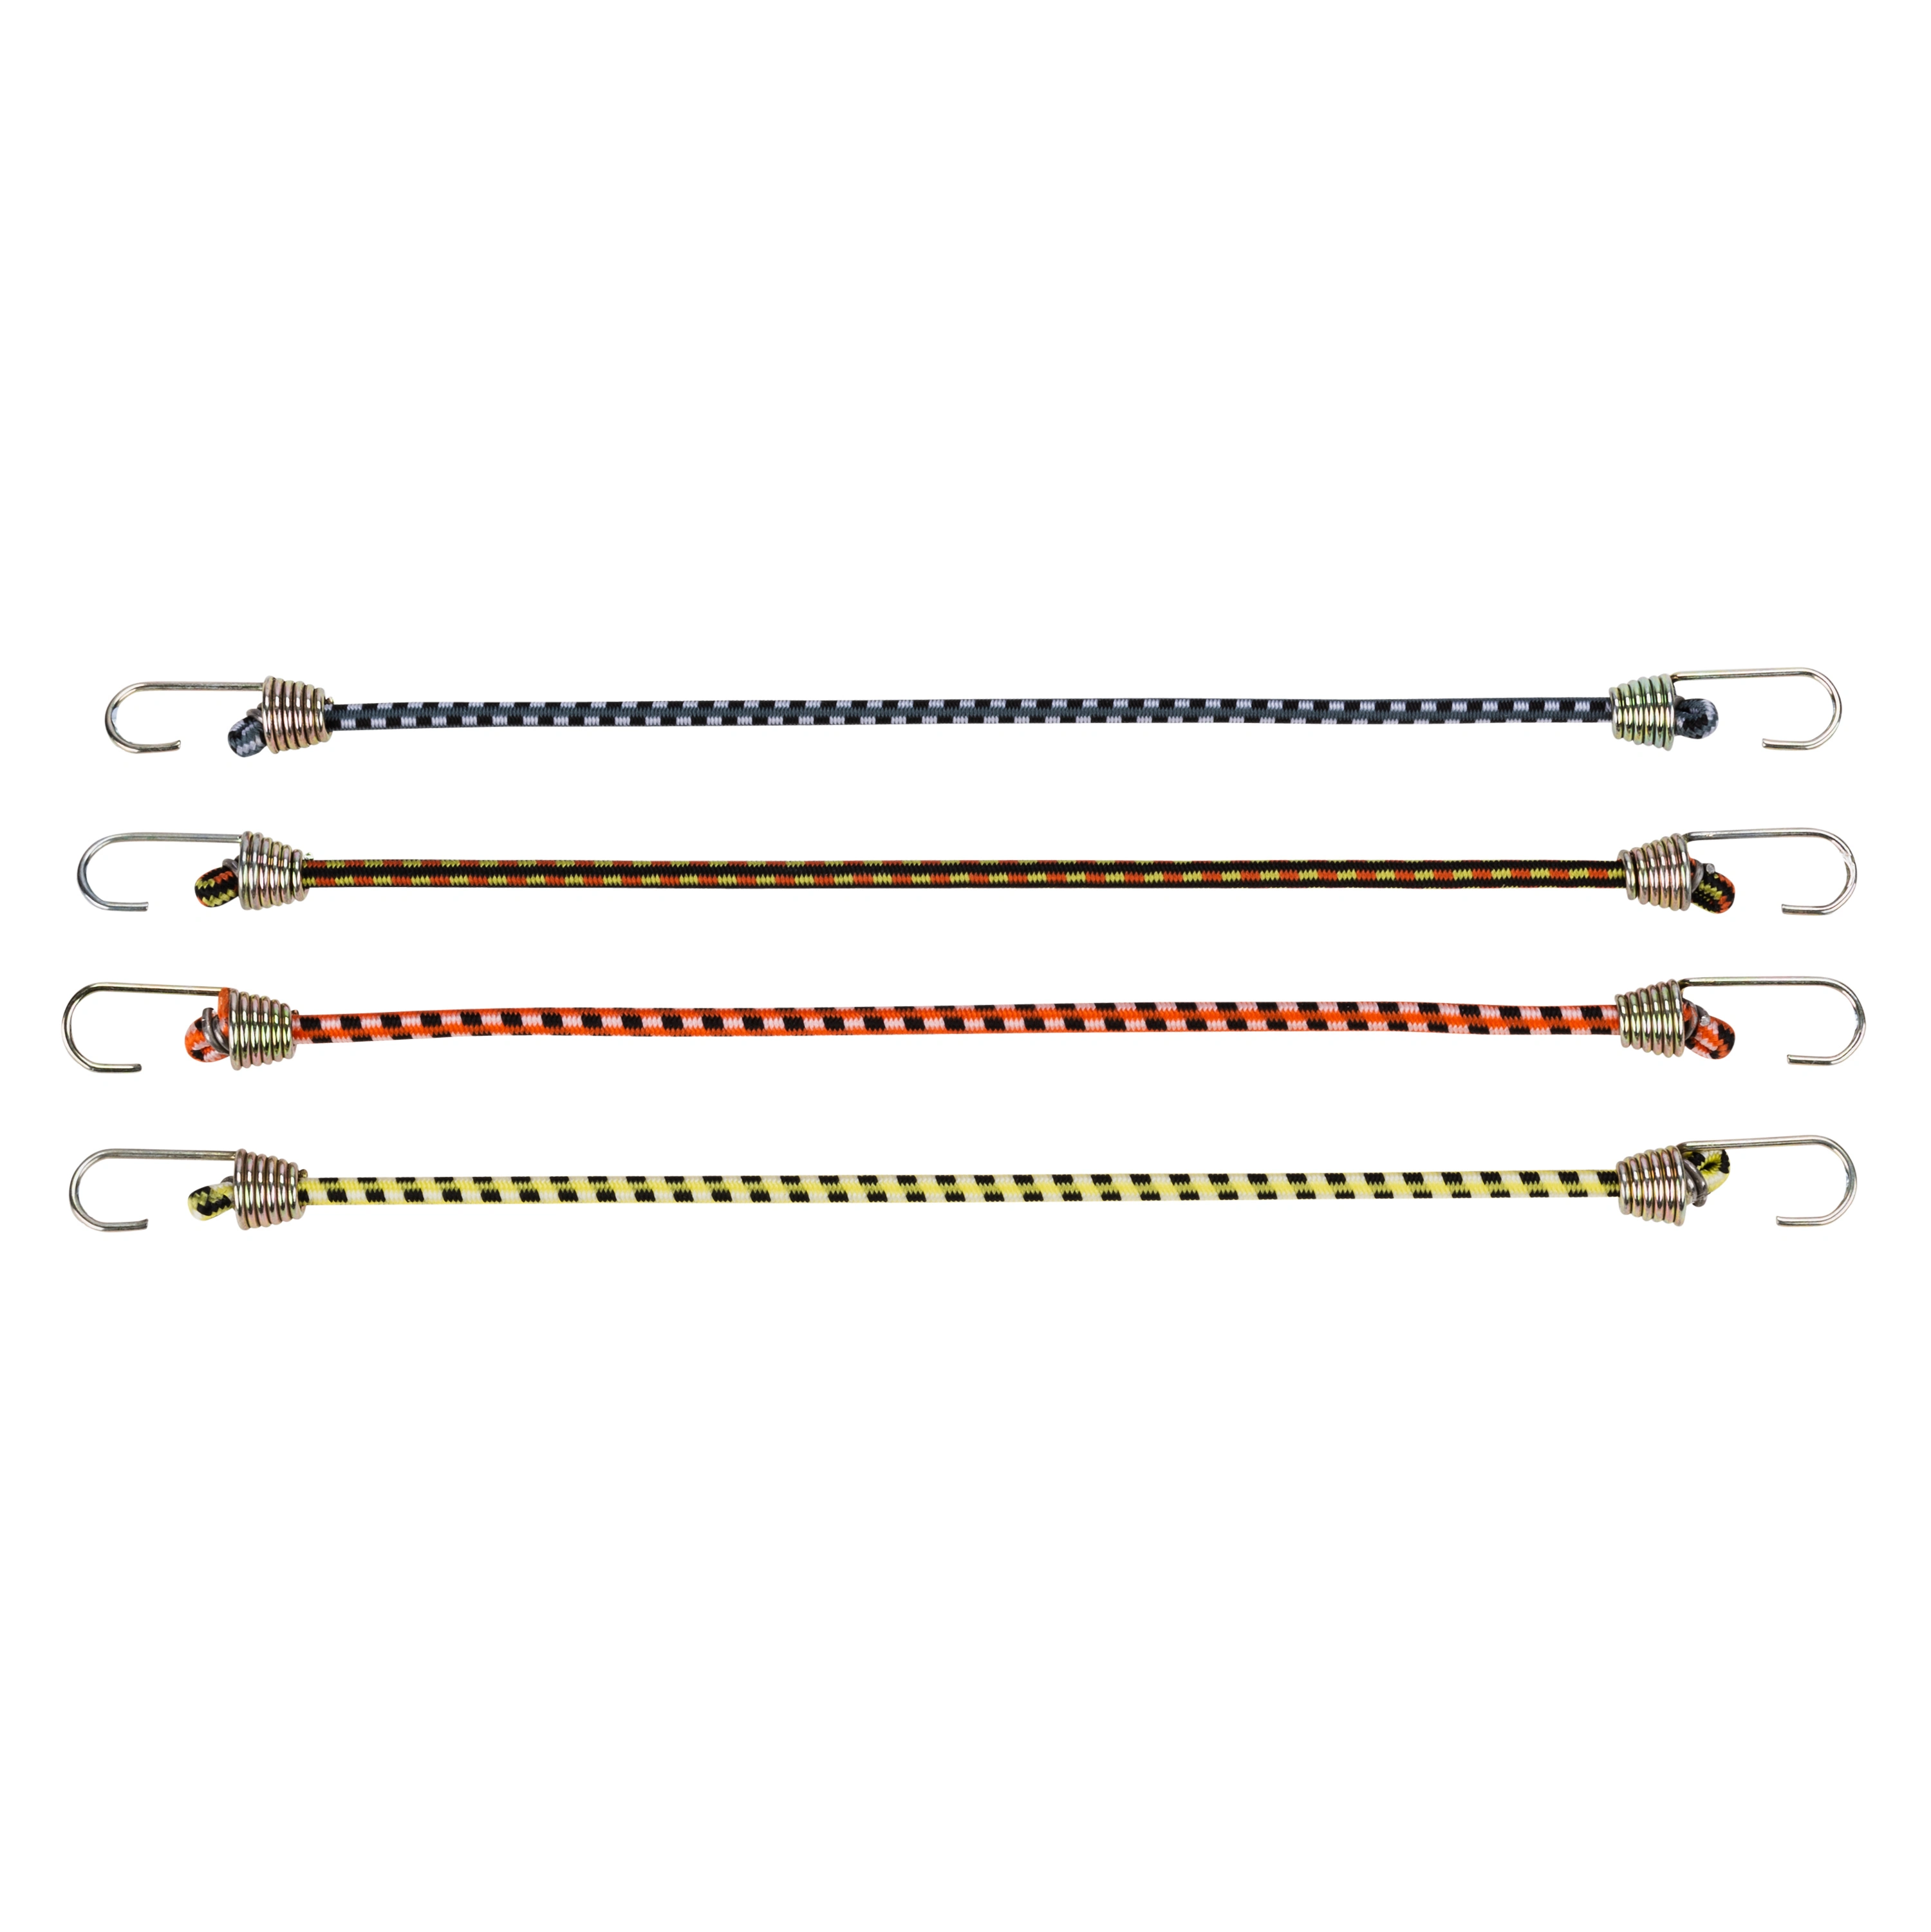 10" Mini Bungee Cords, 4 Pack variant image view